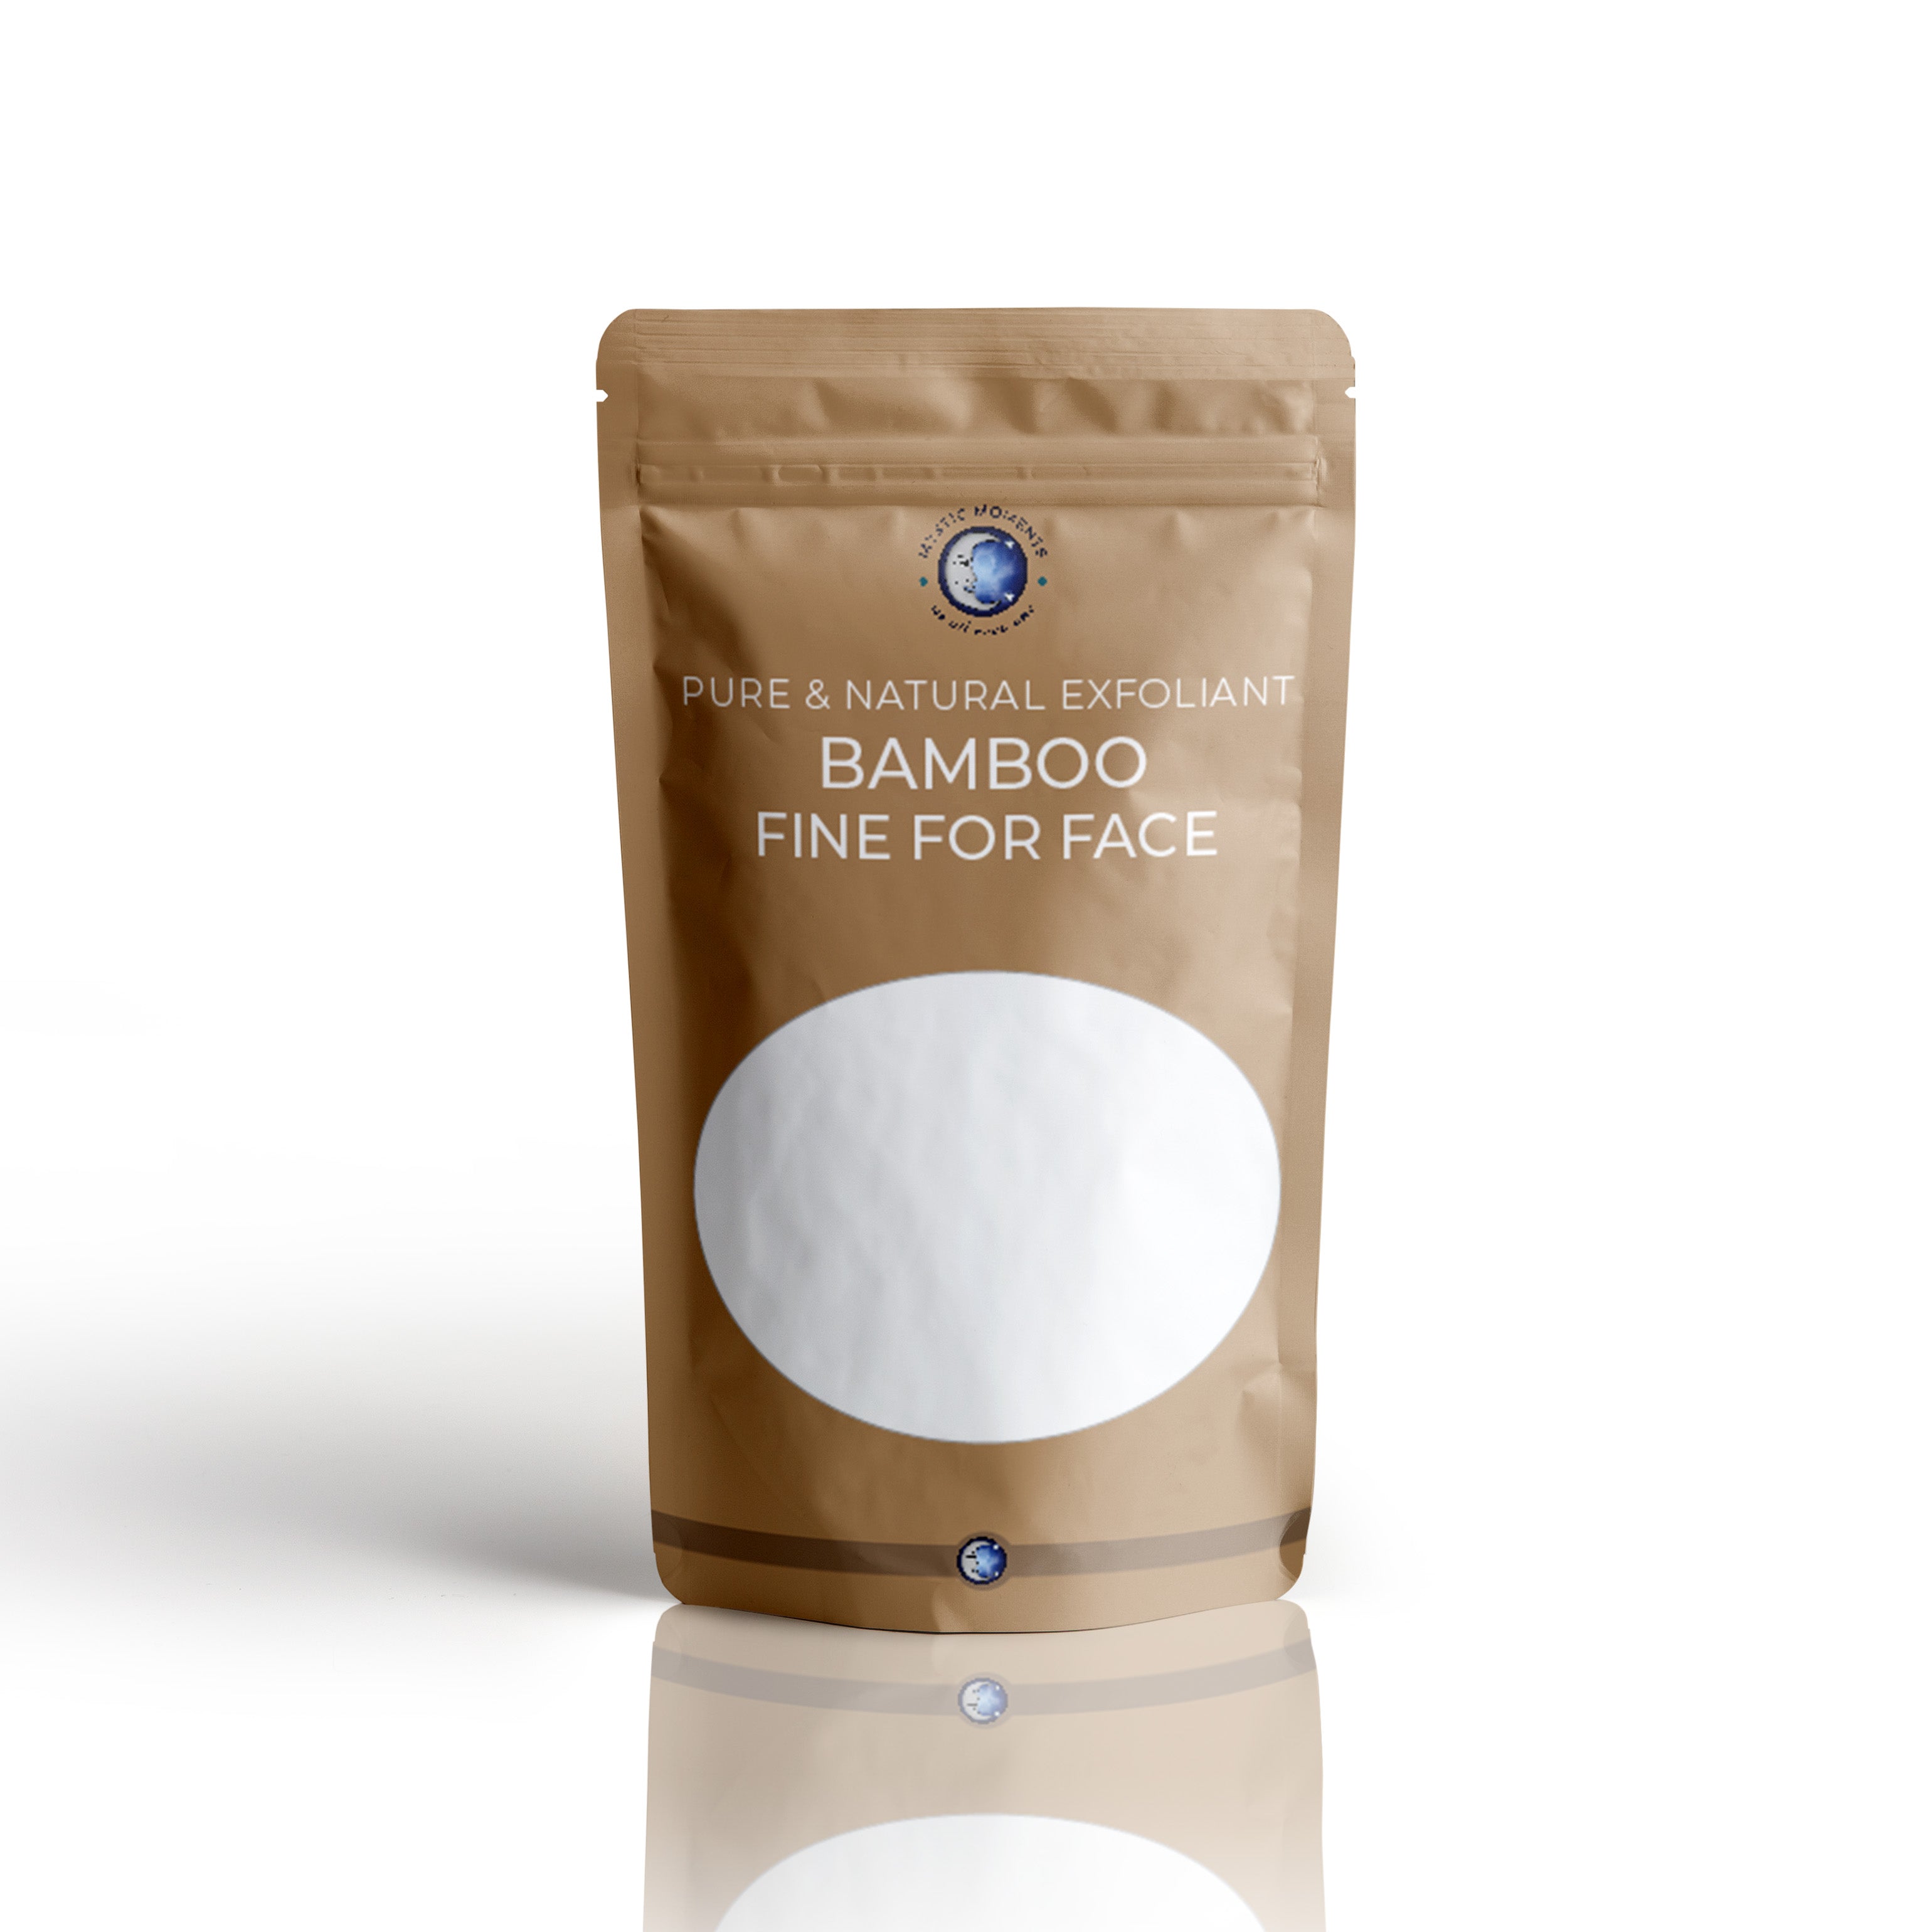 Bamboo Fine For Face Exfoliant